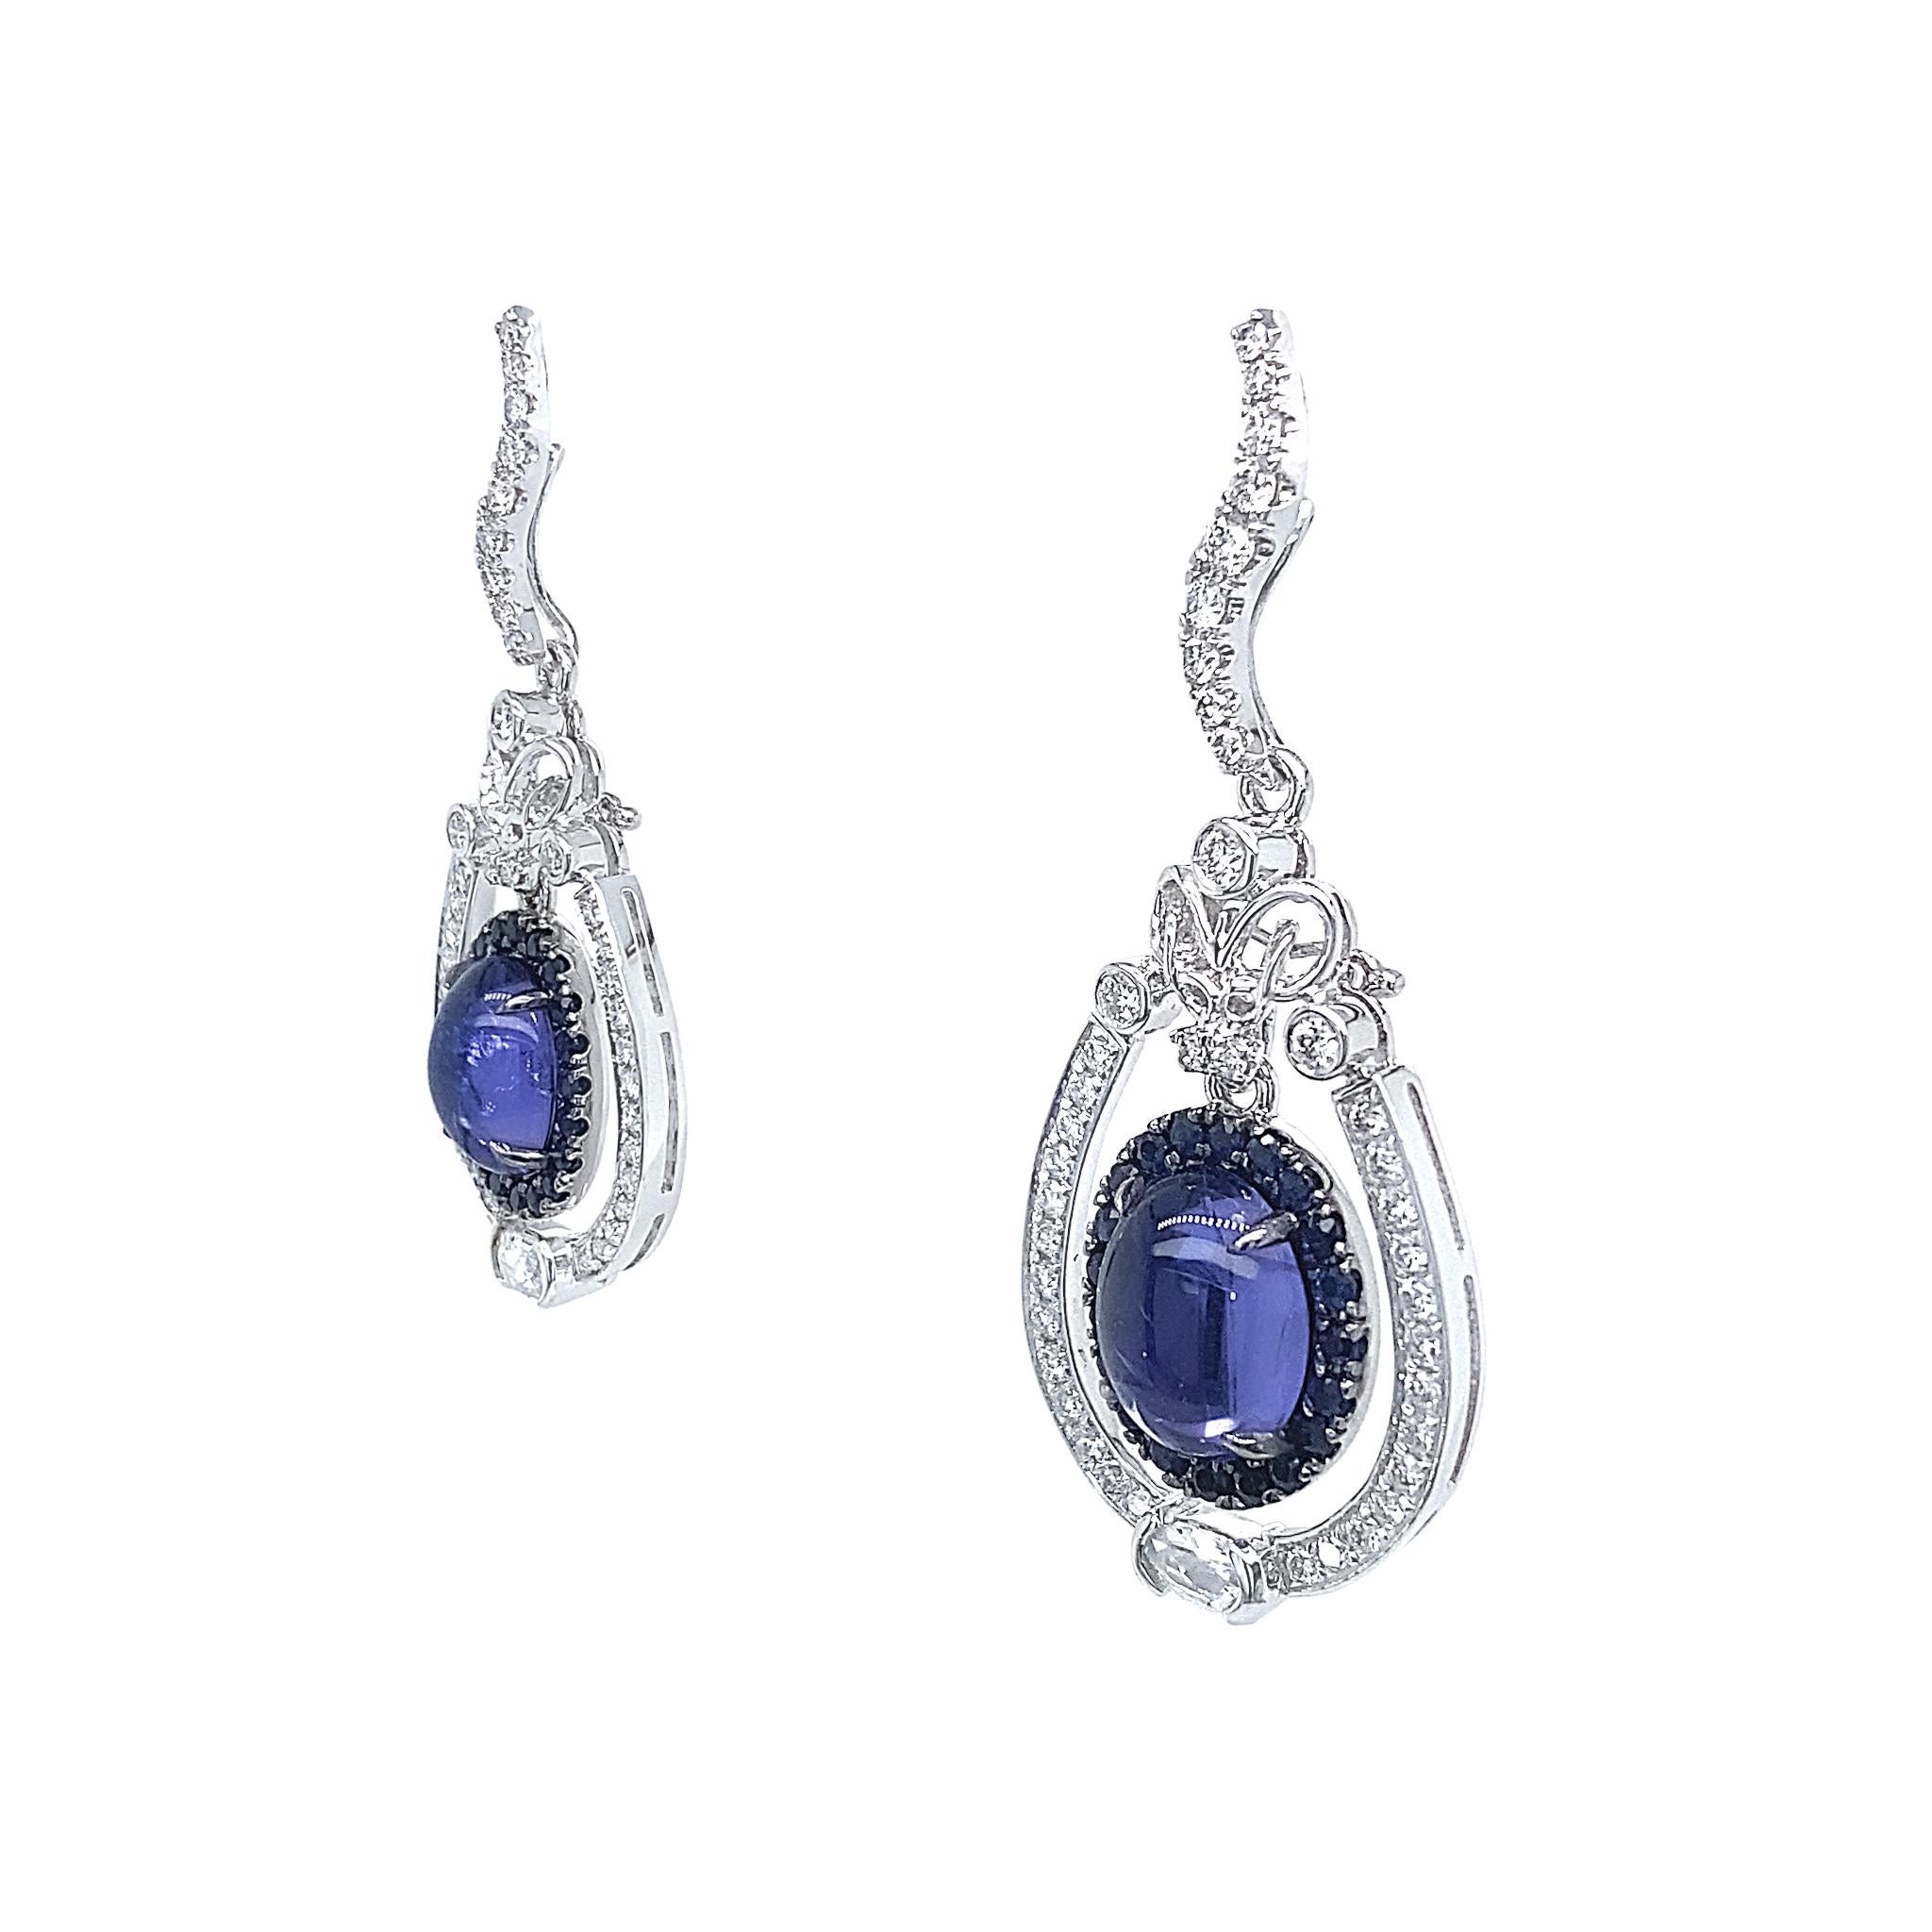 A pair of rare transparent 4.30ct Tanzanite cabochon drop earrings, certified by IGI to be 'Intense Bluish Violet'. Designed versatile to be worn in different ways, they are handcrafted in-house by expert artisans.

2 IGI Certified 'Intense Bluish